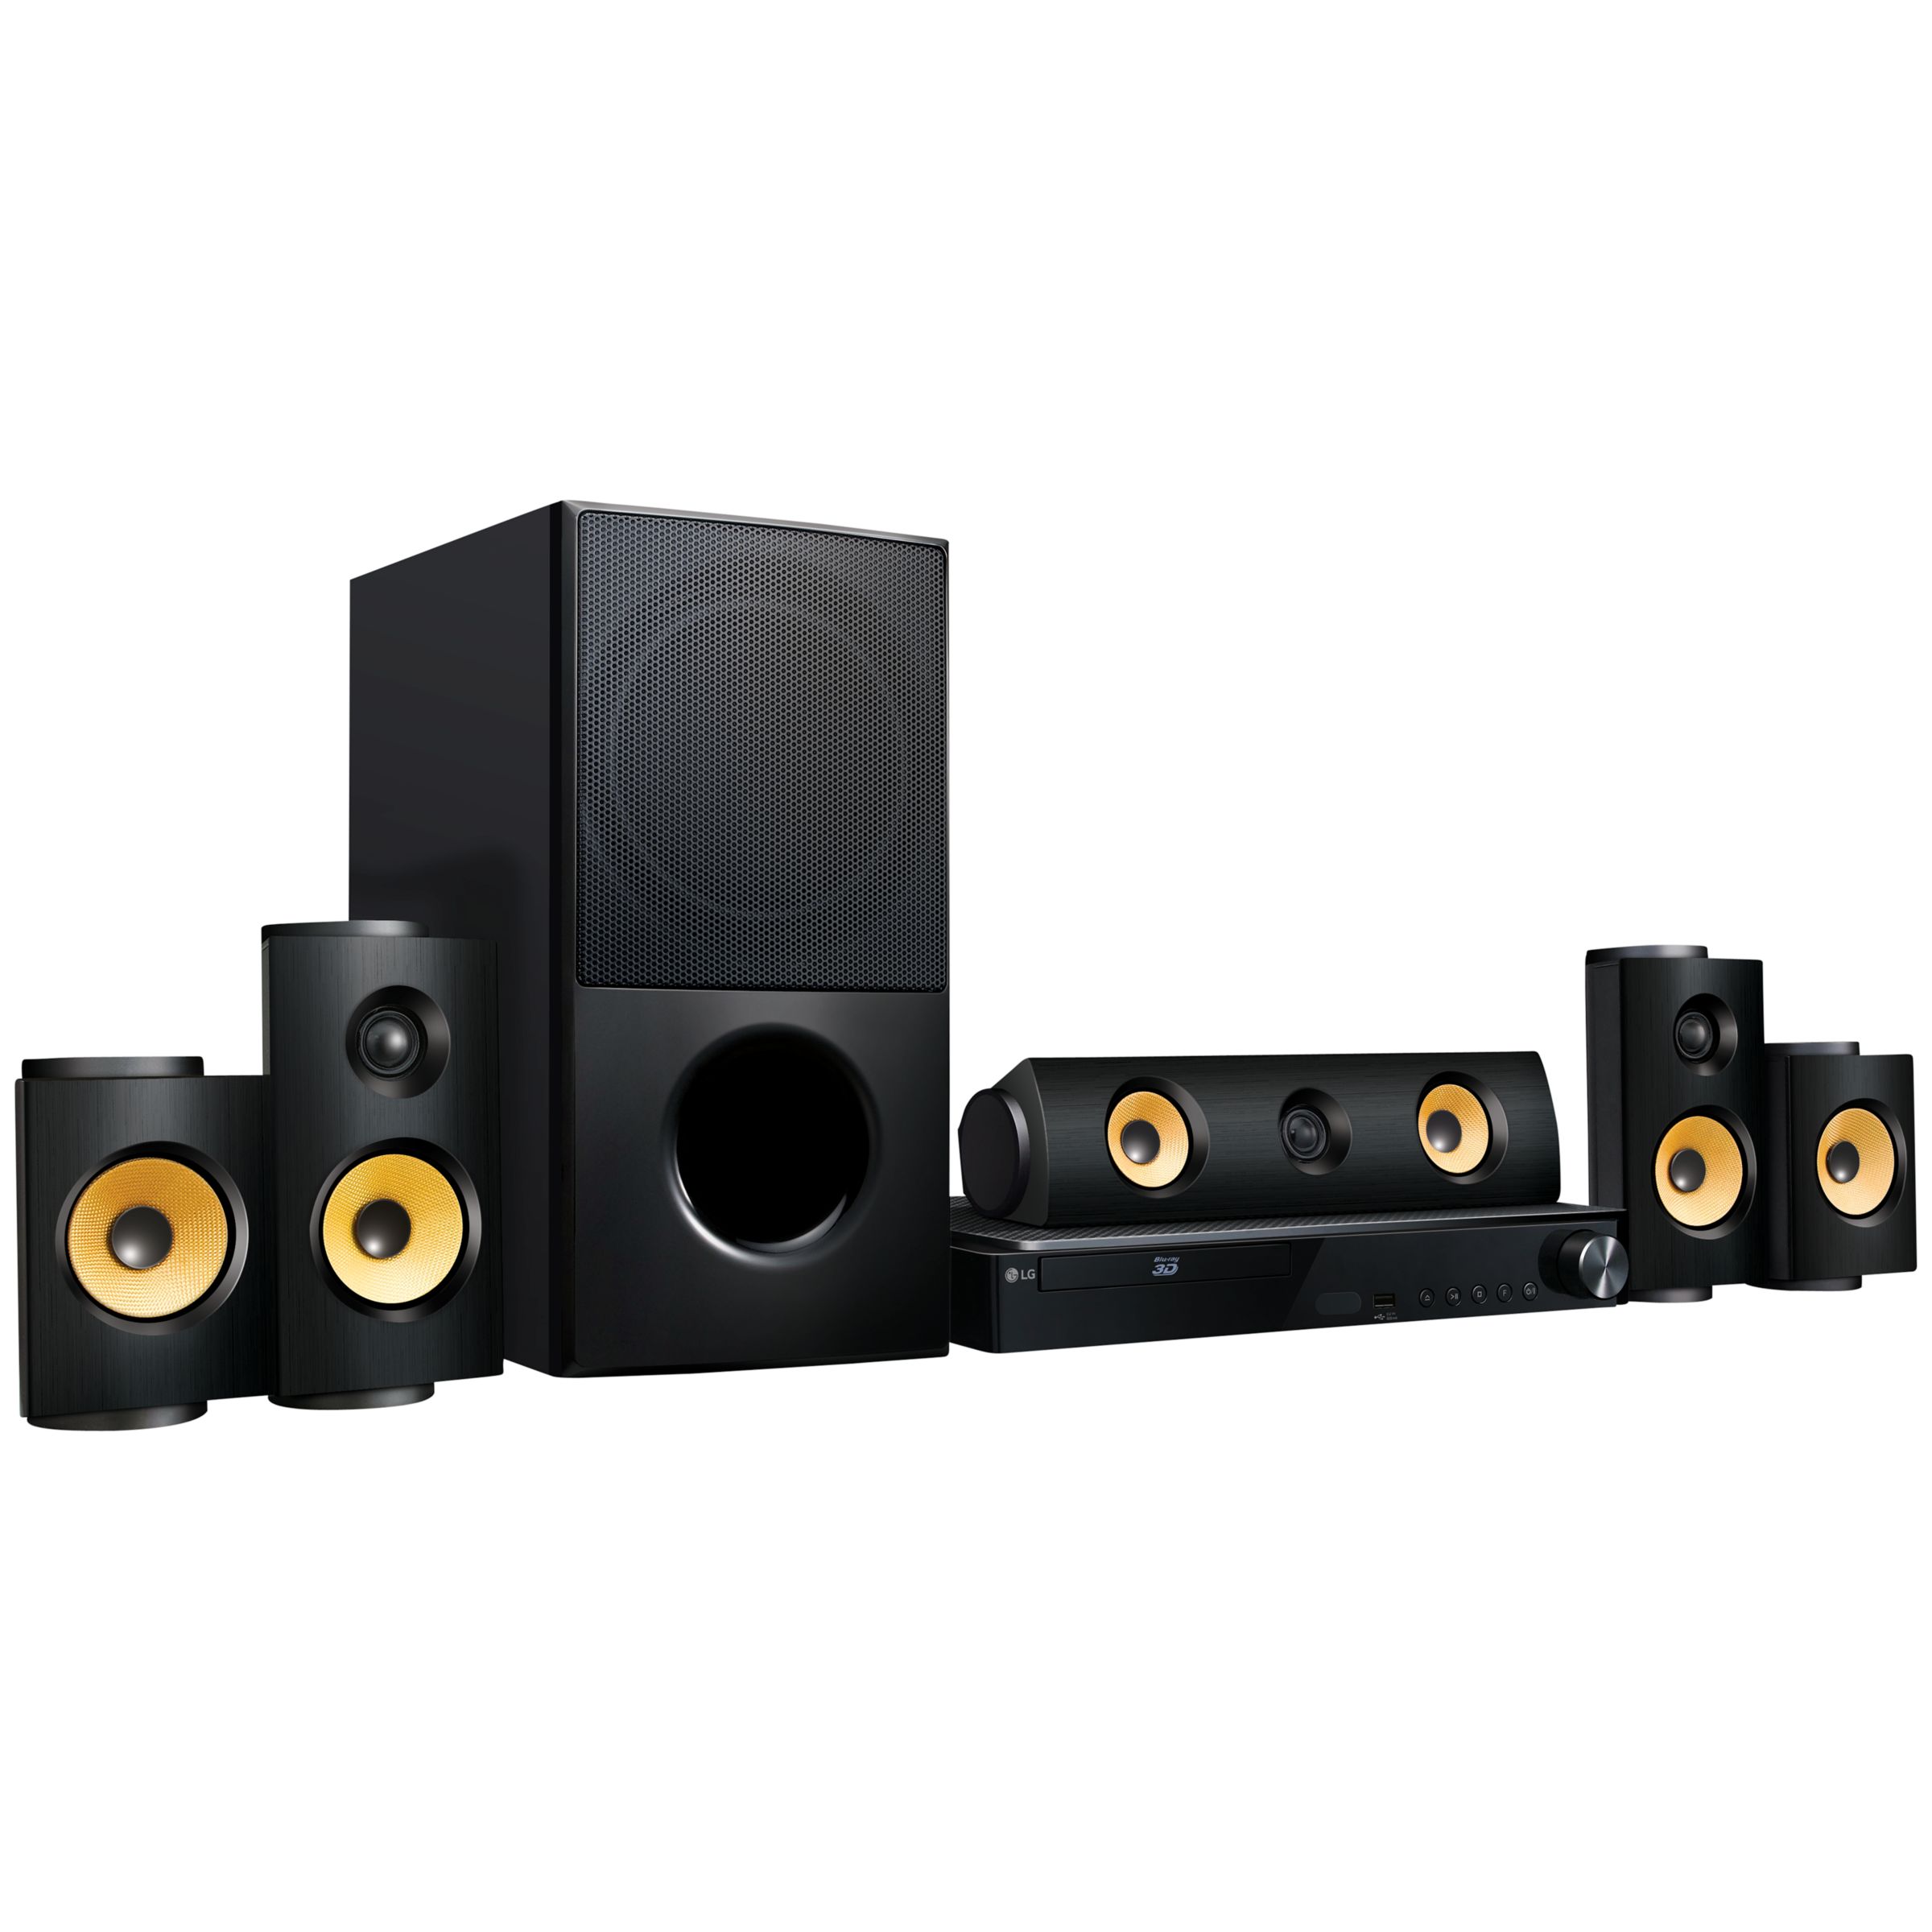 lg smart home theater system